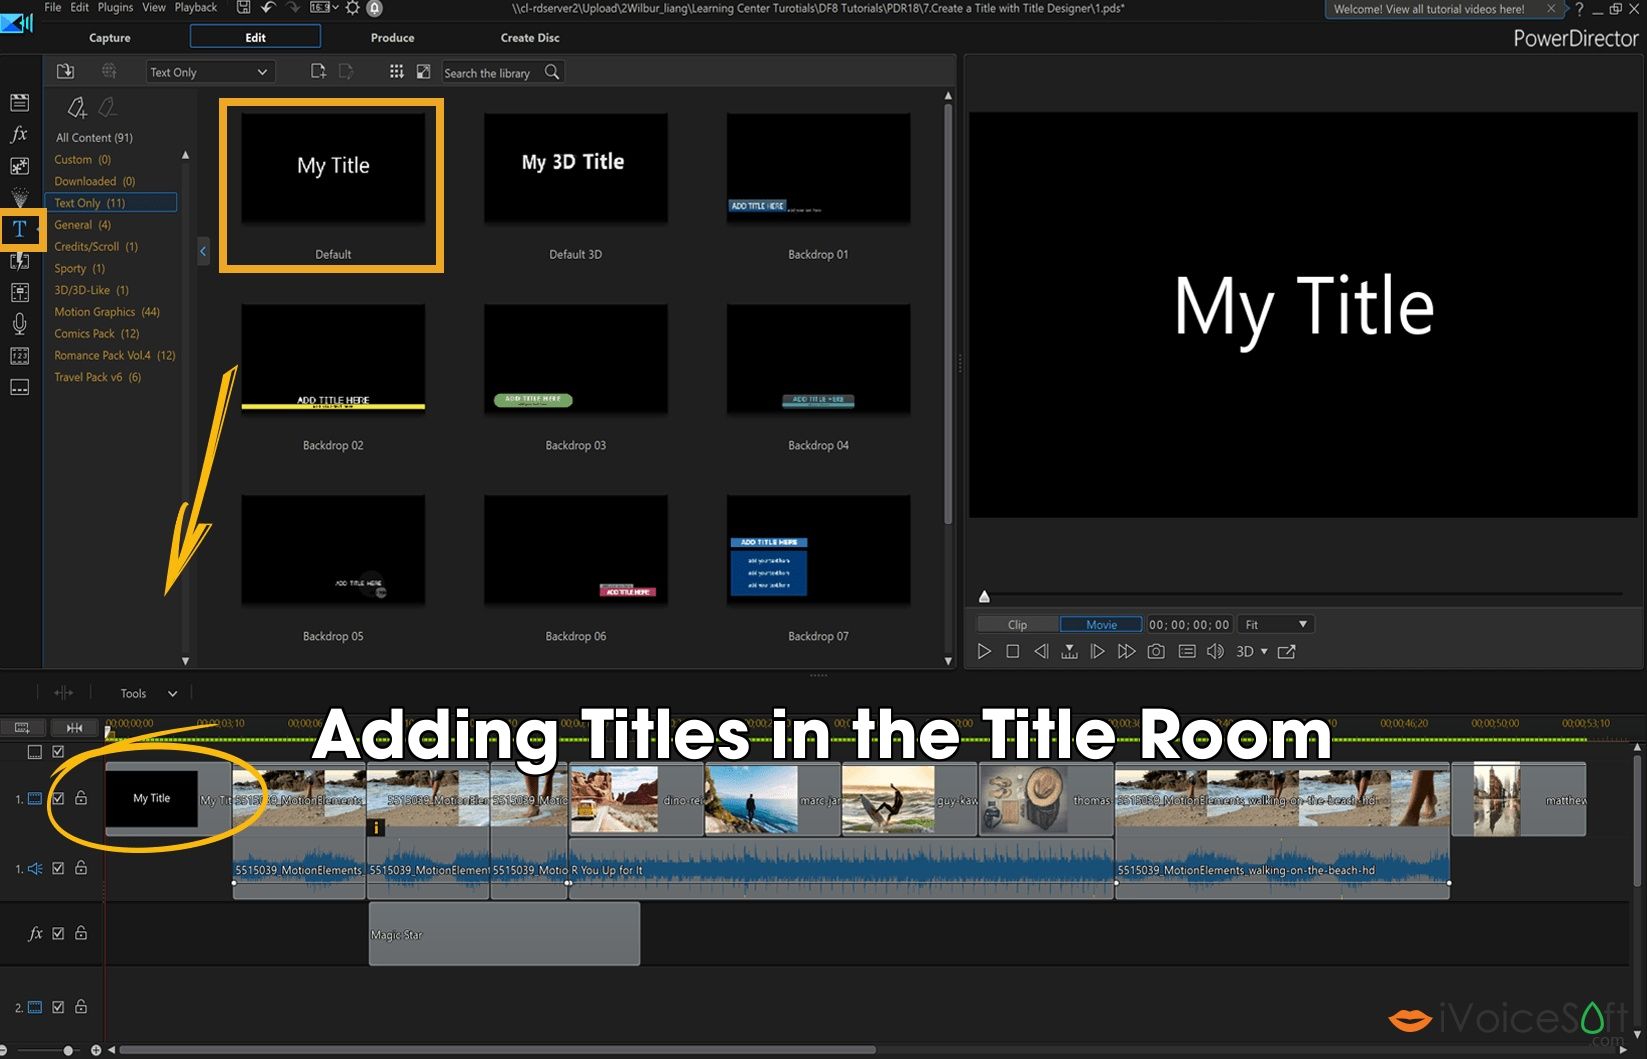     Adding Titles in the Title Room